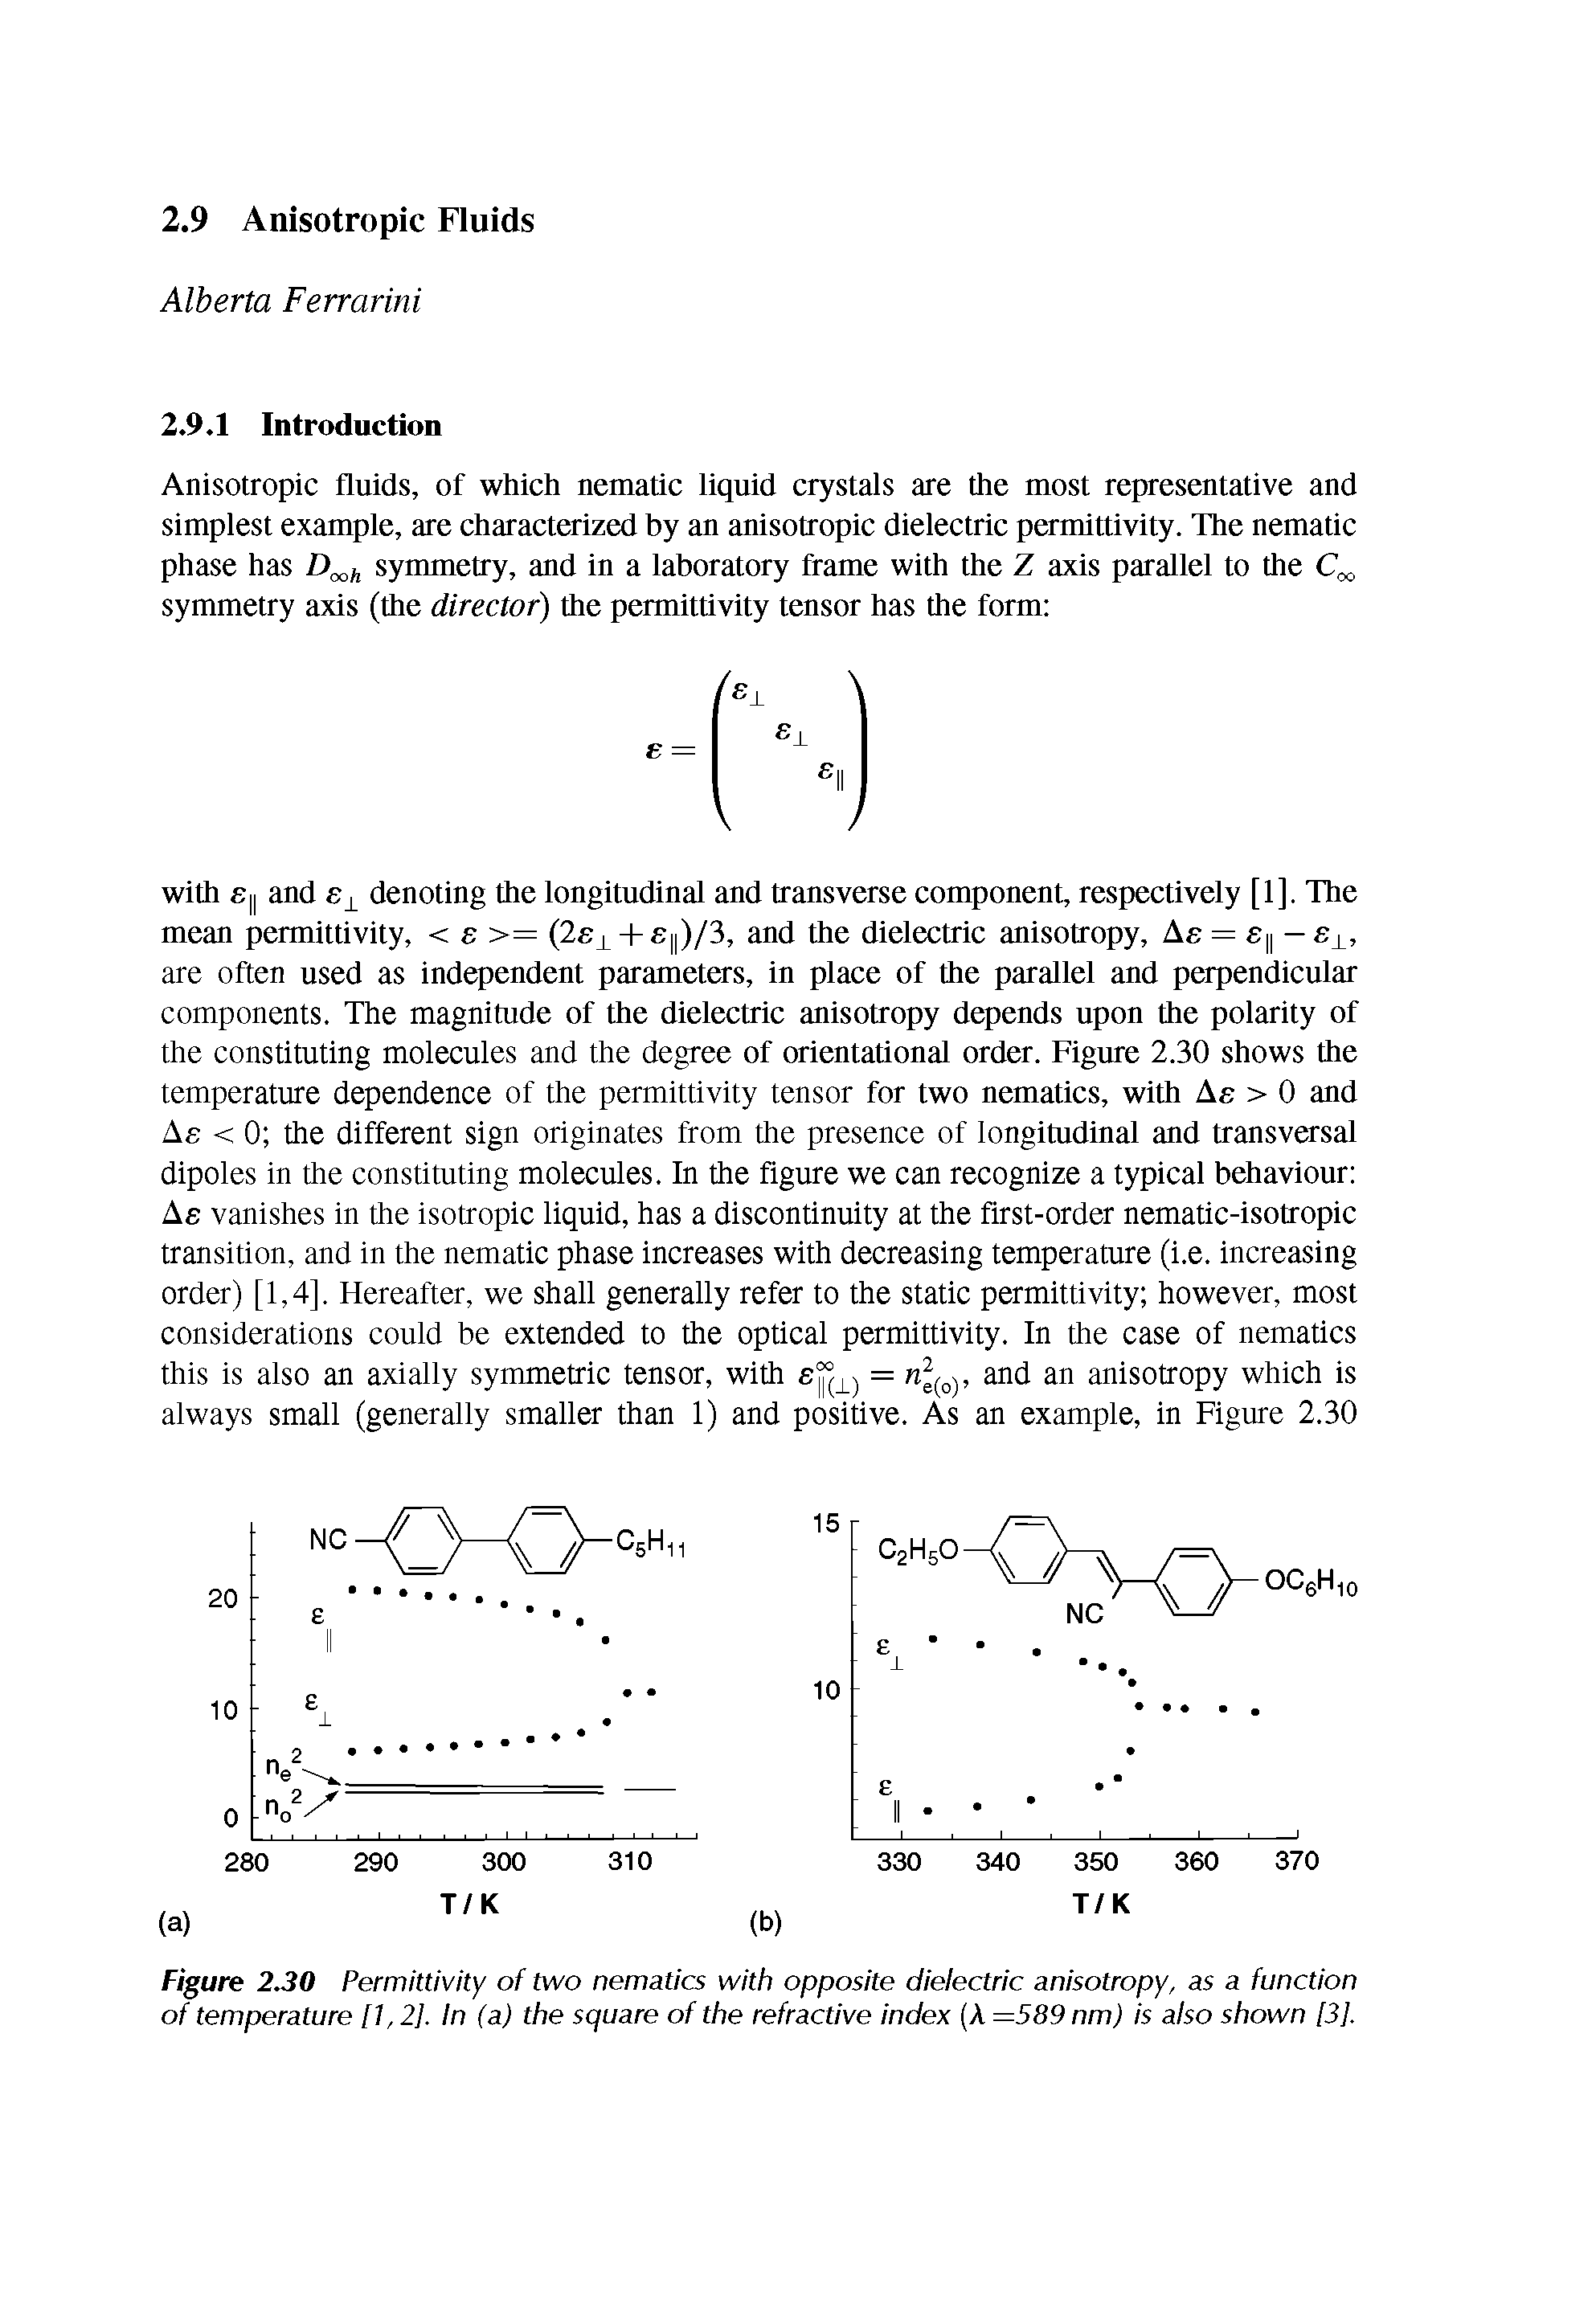 Figure 2.30 Permittivity of two nematics with opposite dielectric anisotropy, as a function of temperature [ 1,2], In (a) the square of the refractive index (A =589 nm) is also shown [3],...